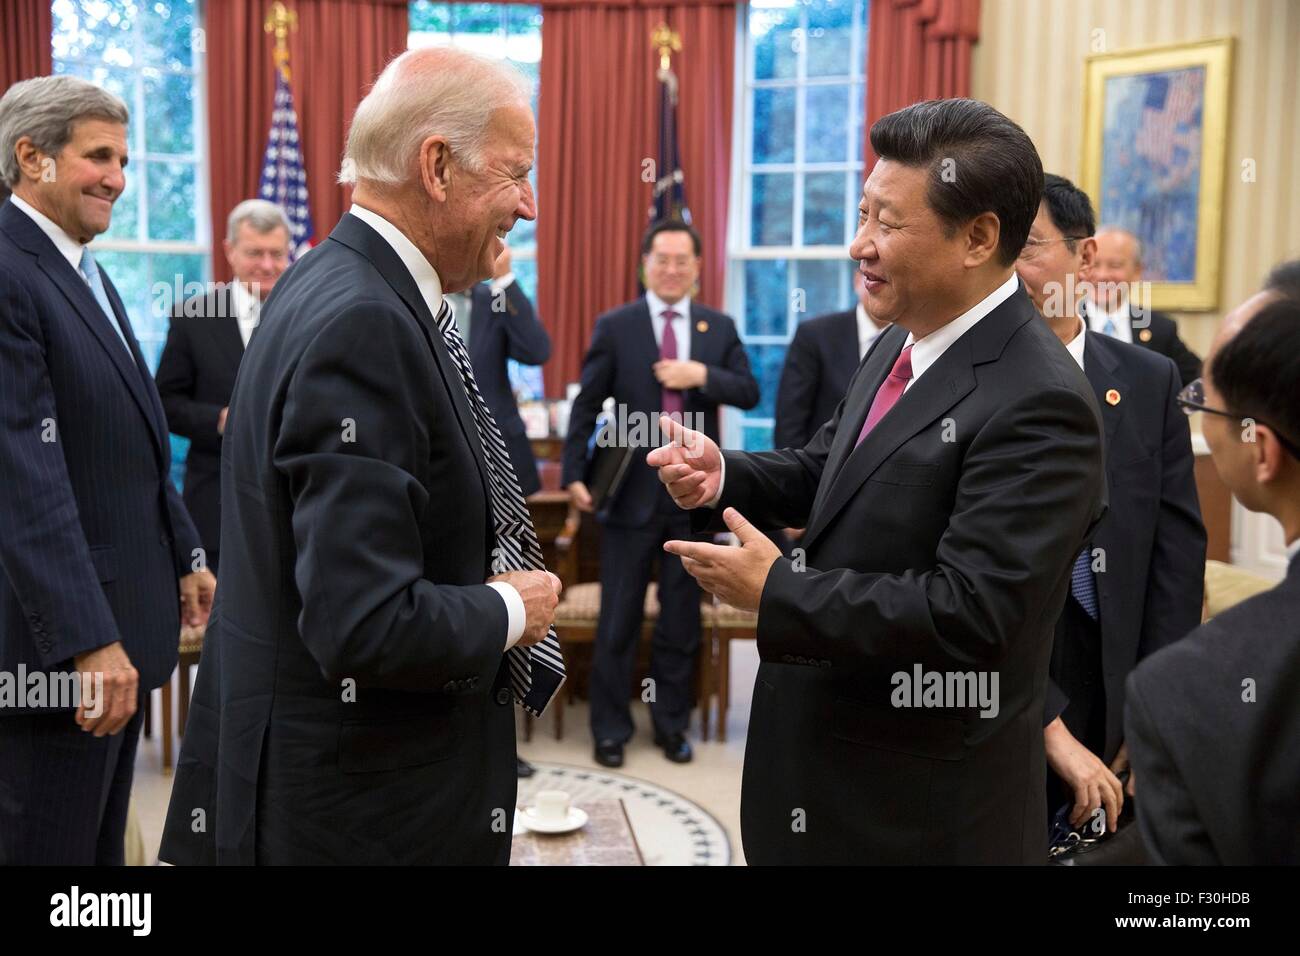 Washington DC, US. 25th Sep, 2015. Chinese President Xi Jinping jokes with U.S. Vice President Joe Biden following a bilateral meeting in the Oval Office of the White House September 25, 2015 in Washington, DC. Stock Photo